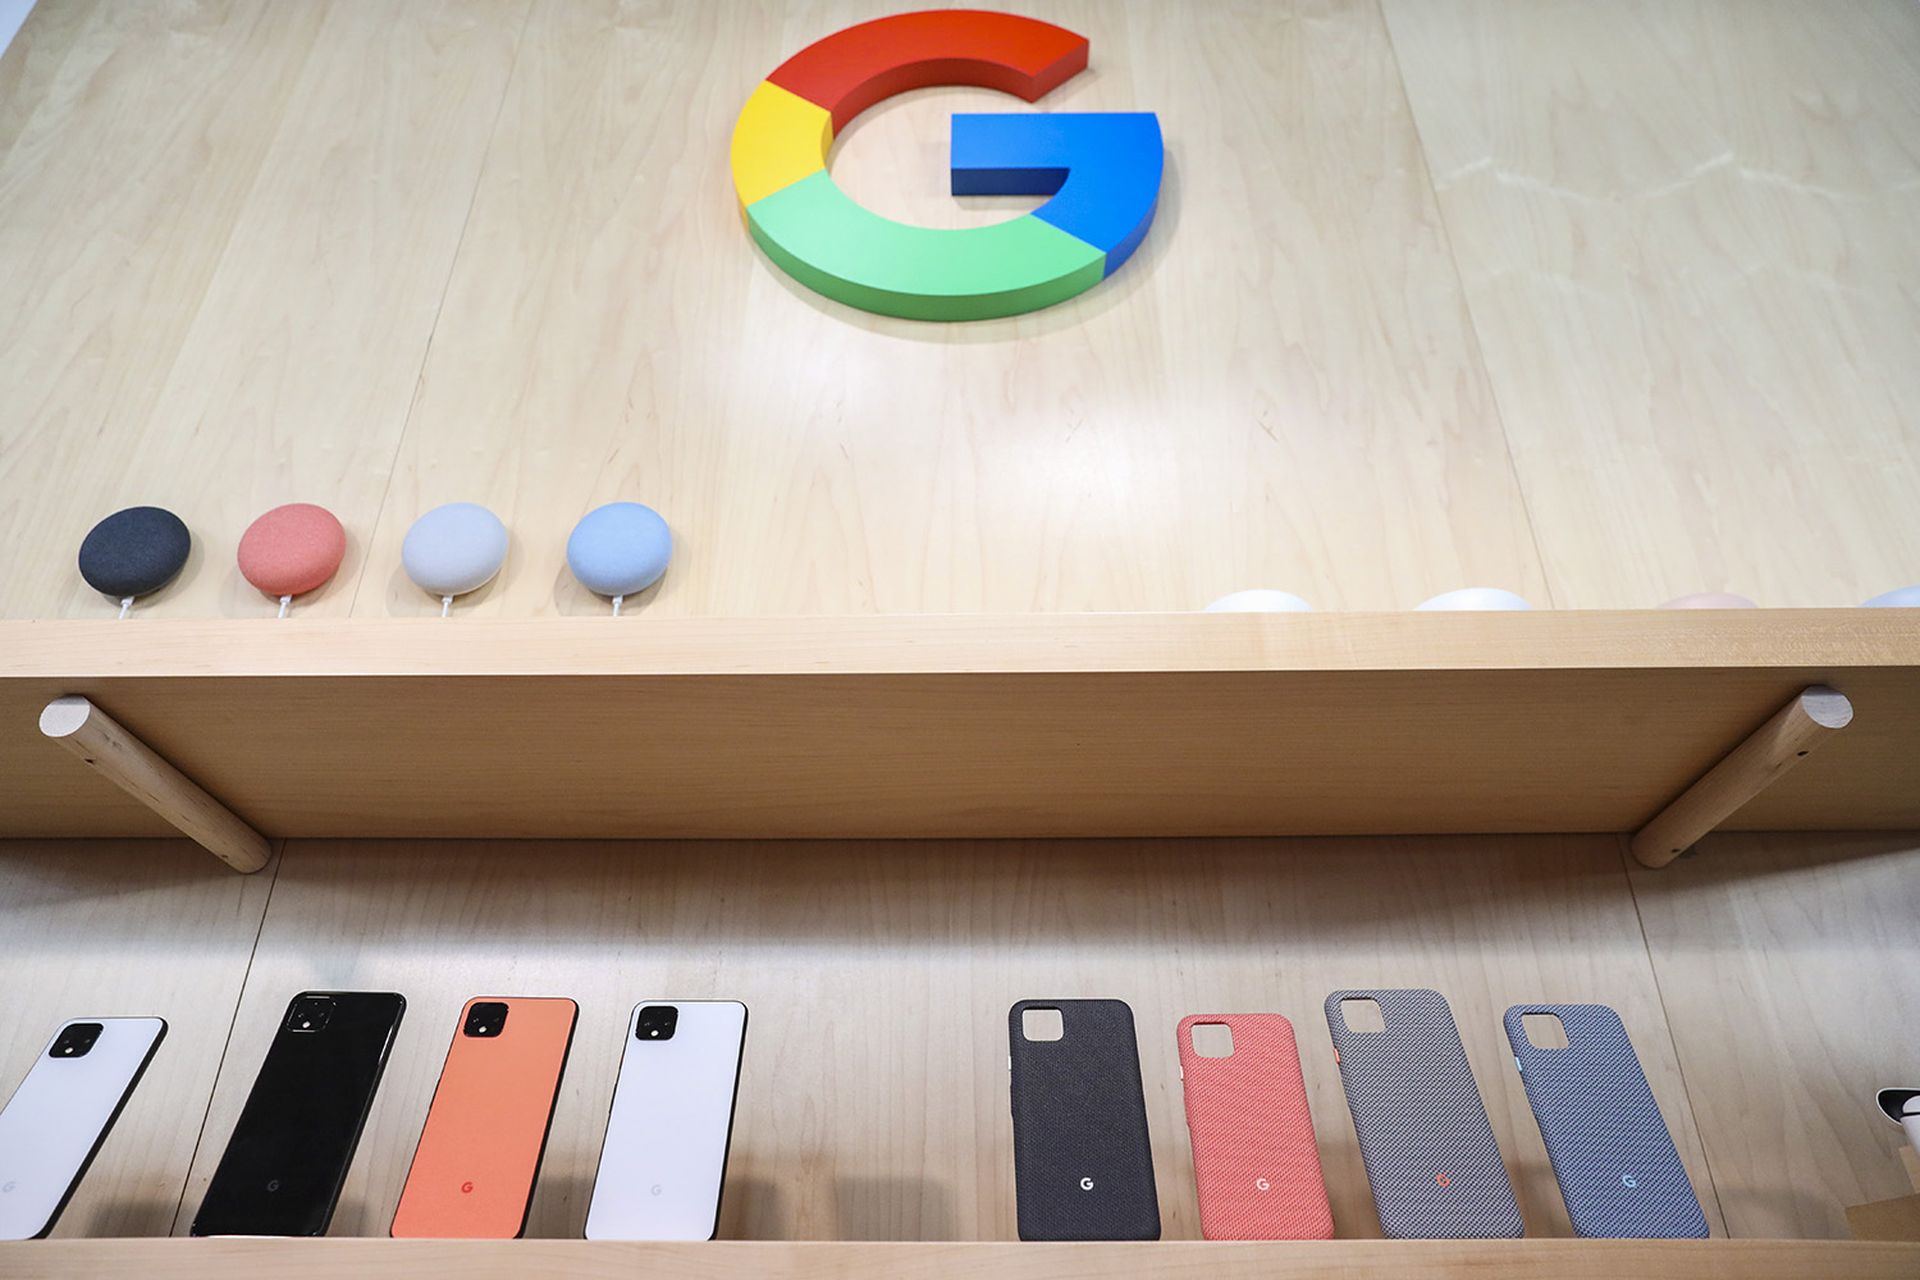 The Google Pixel 4 smartphone and cases are displayed during a Google launch event on Oct. 15, 2019, in New York City. (Photo by Drew Angerer/Getty Images)